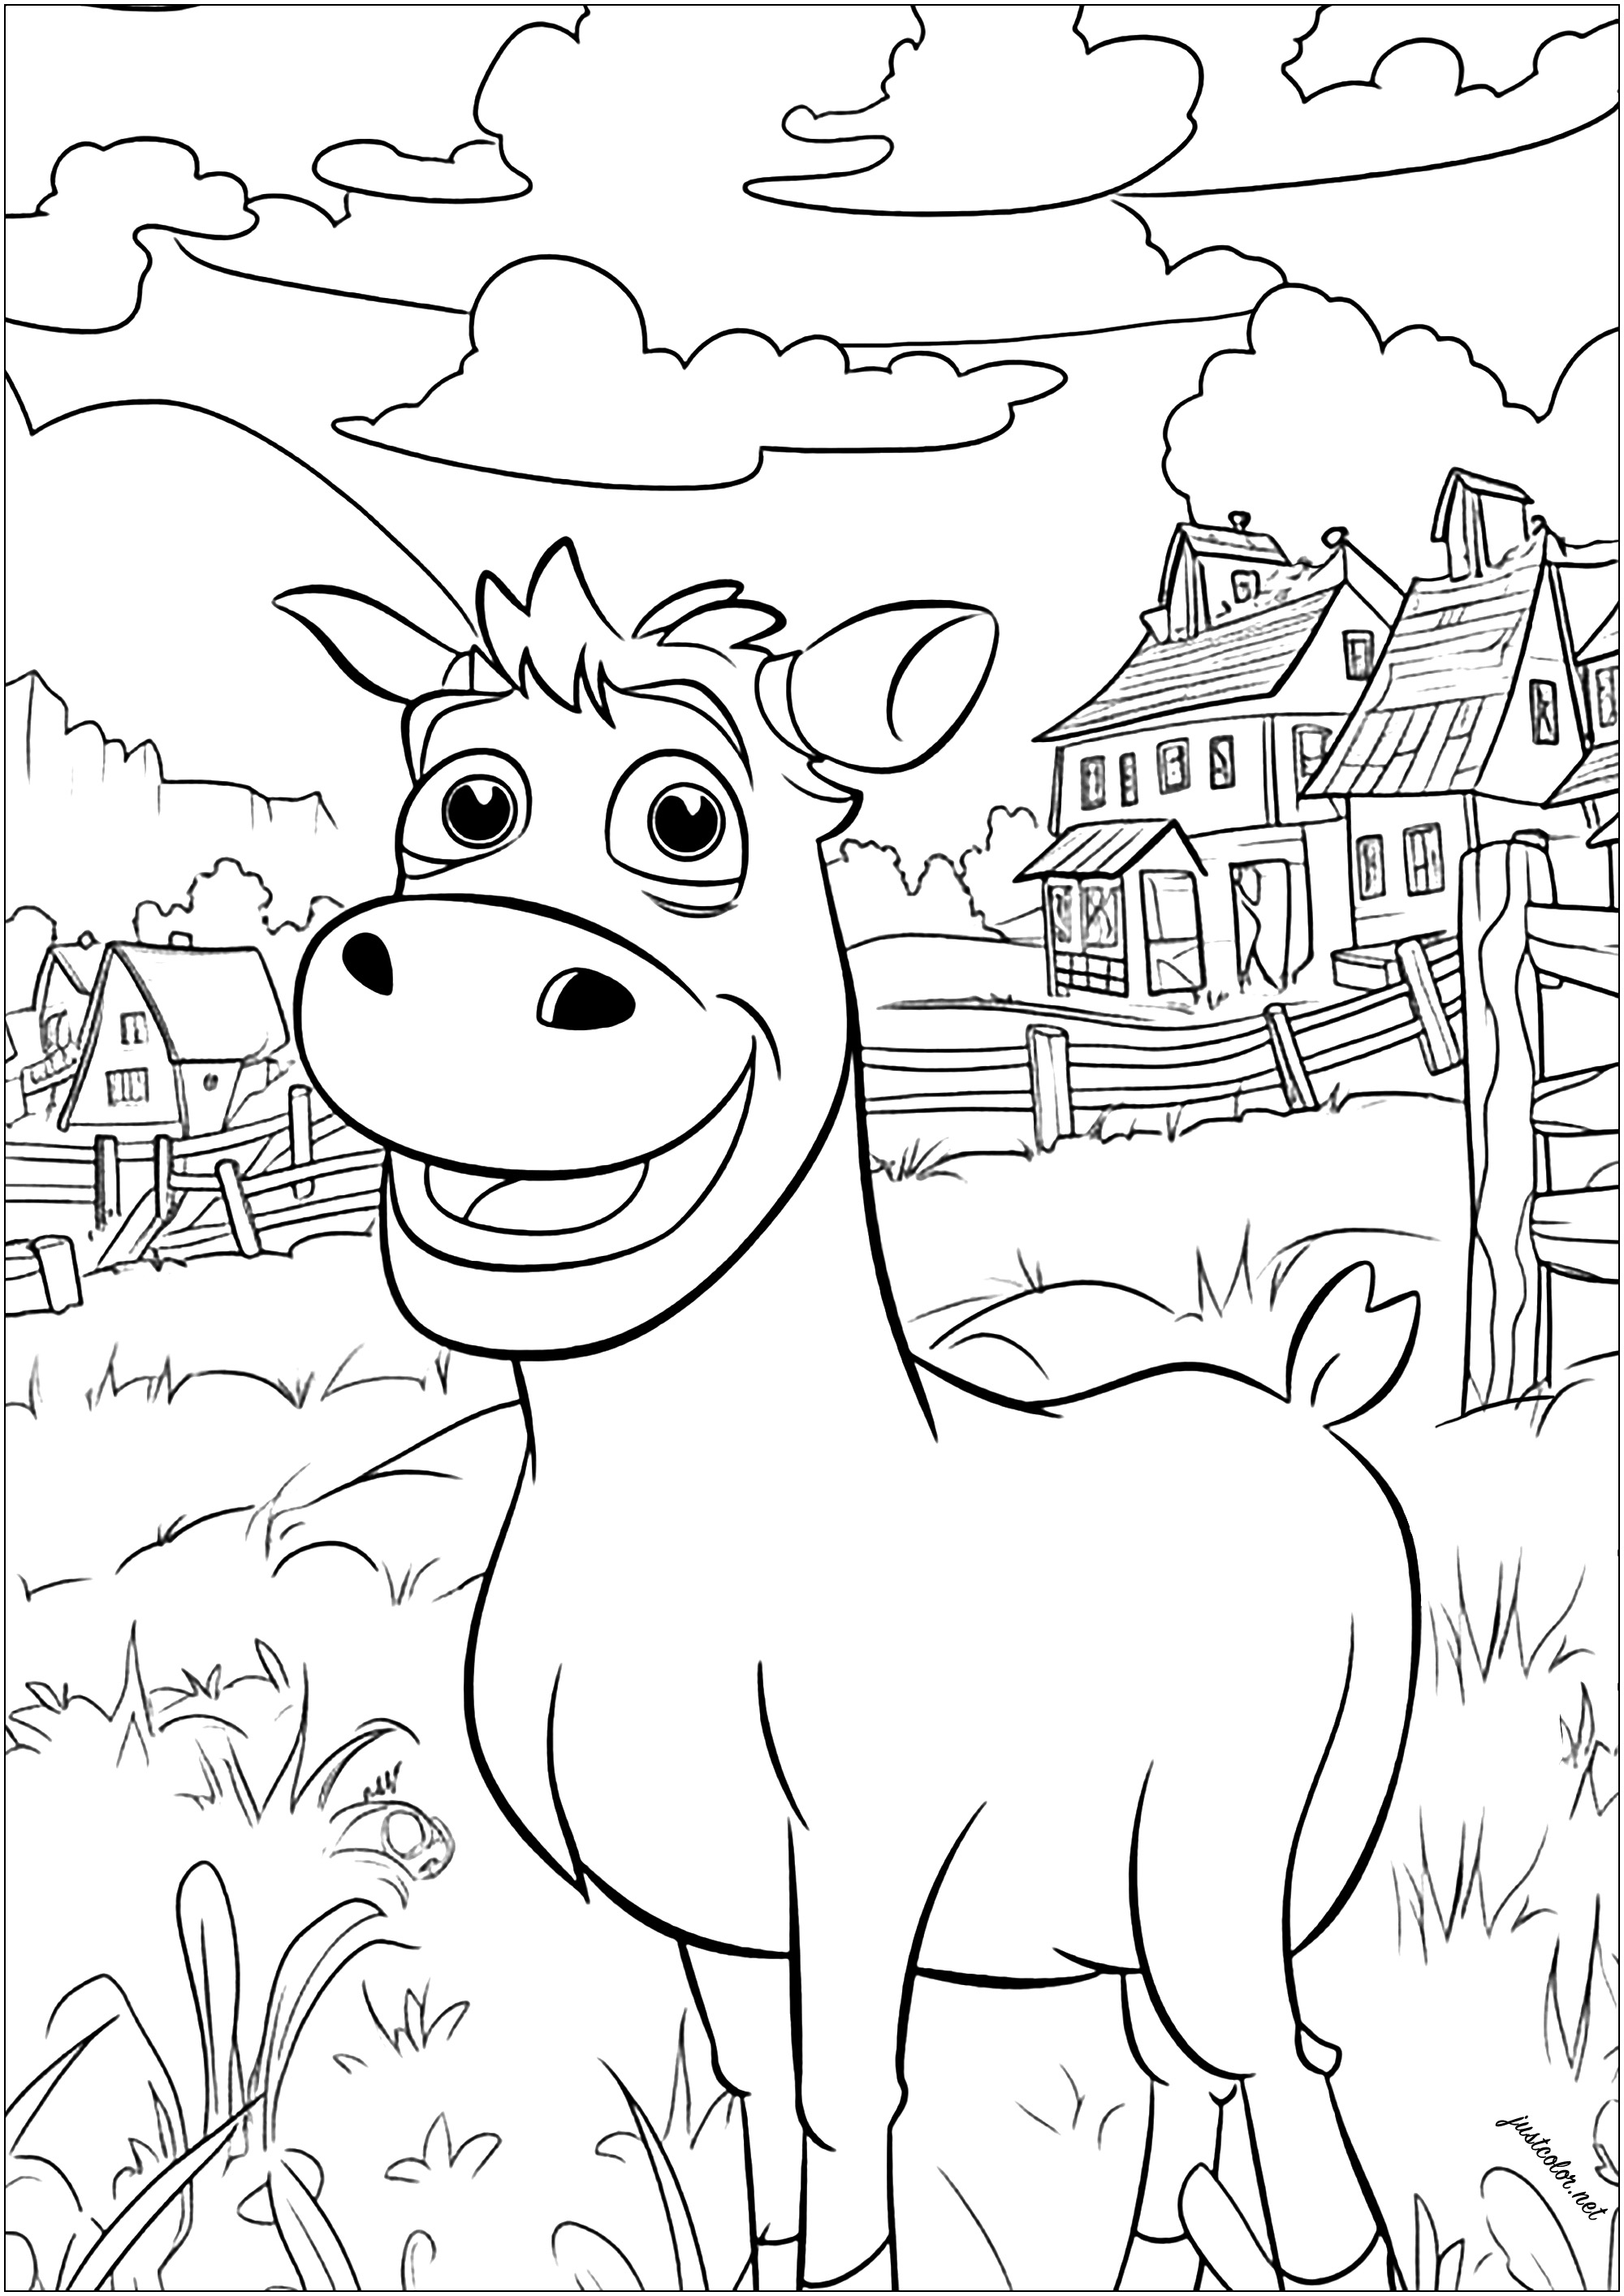 Pretty cow to colorThis friendly cow is in her field with tall grass, with houses and a traditional farm in the background.